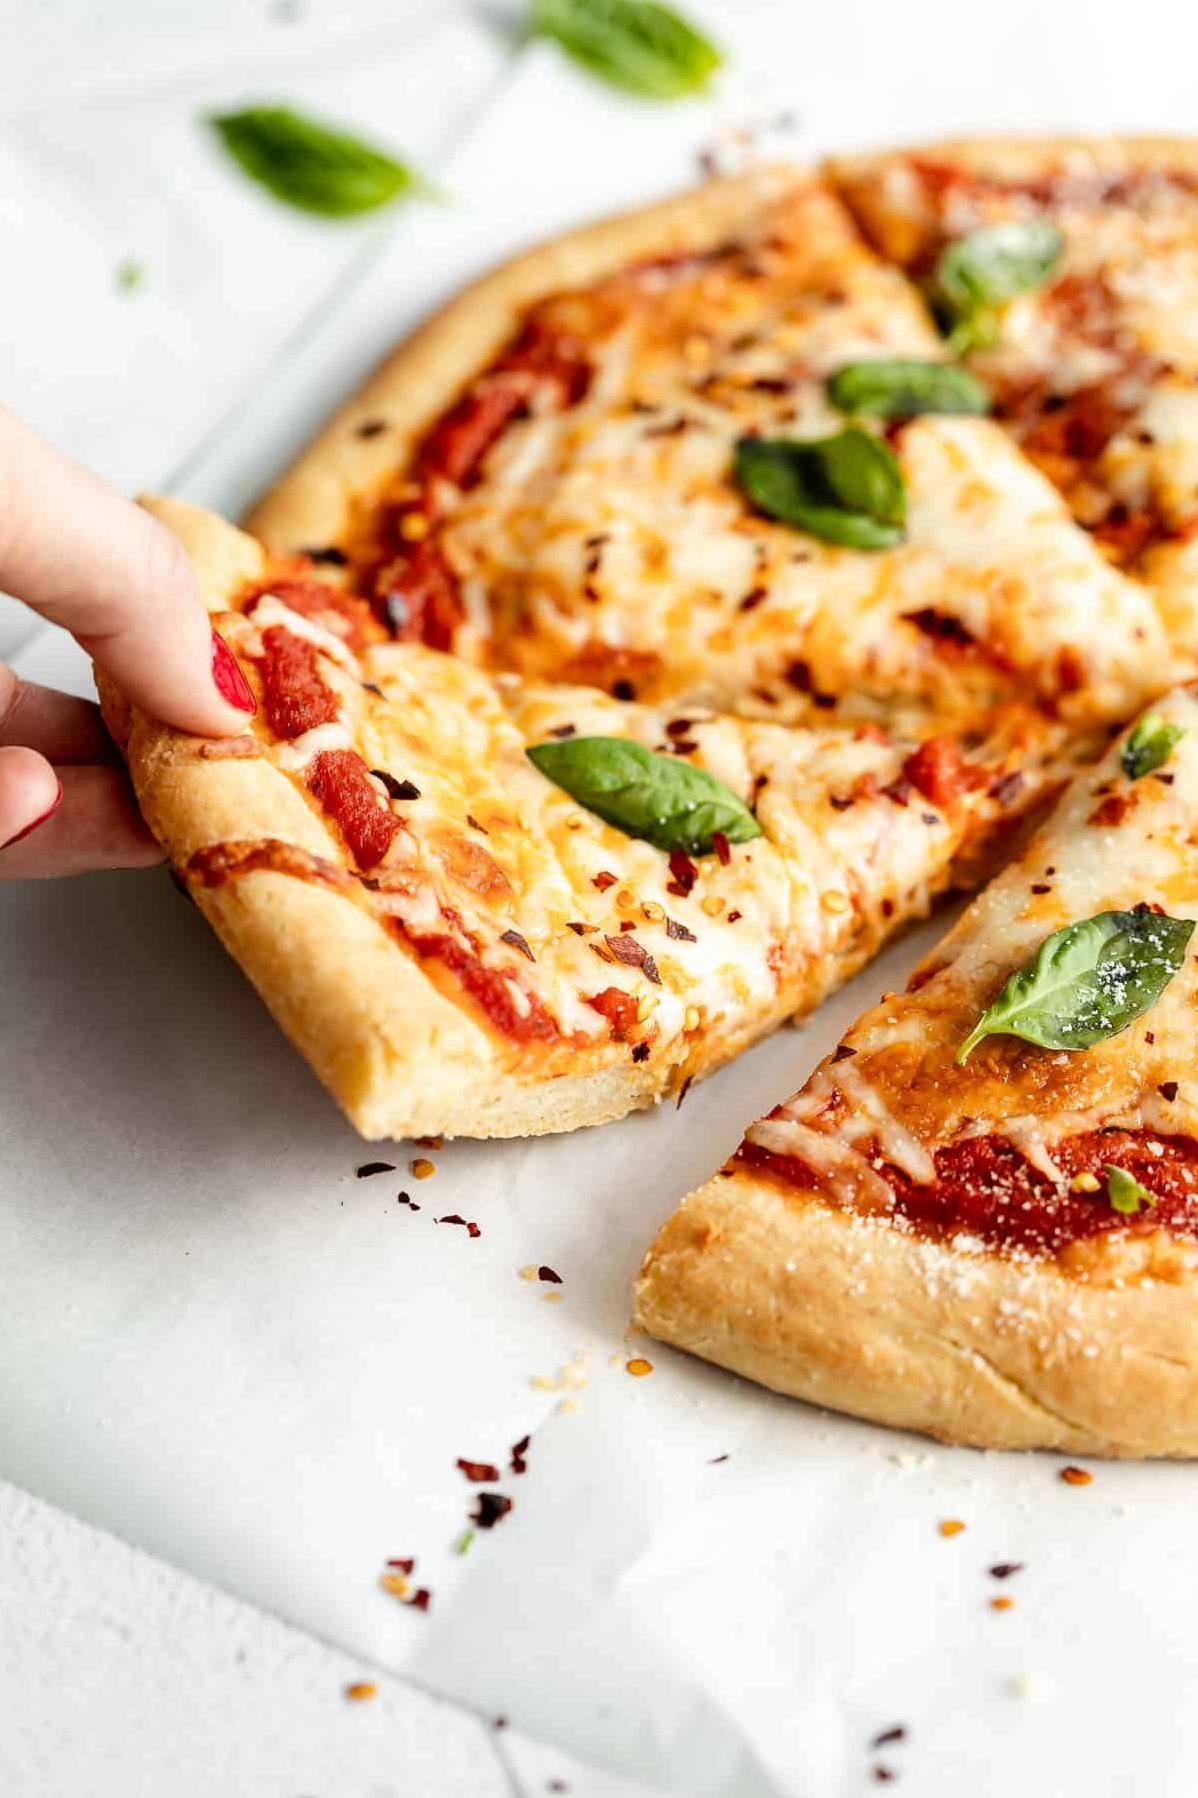  Dive into this gluten-free crust, guilt-free.